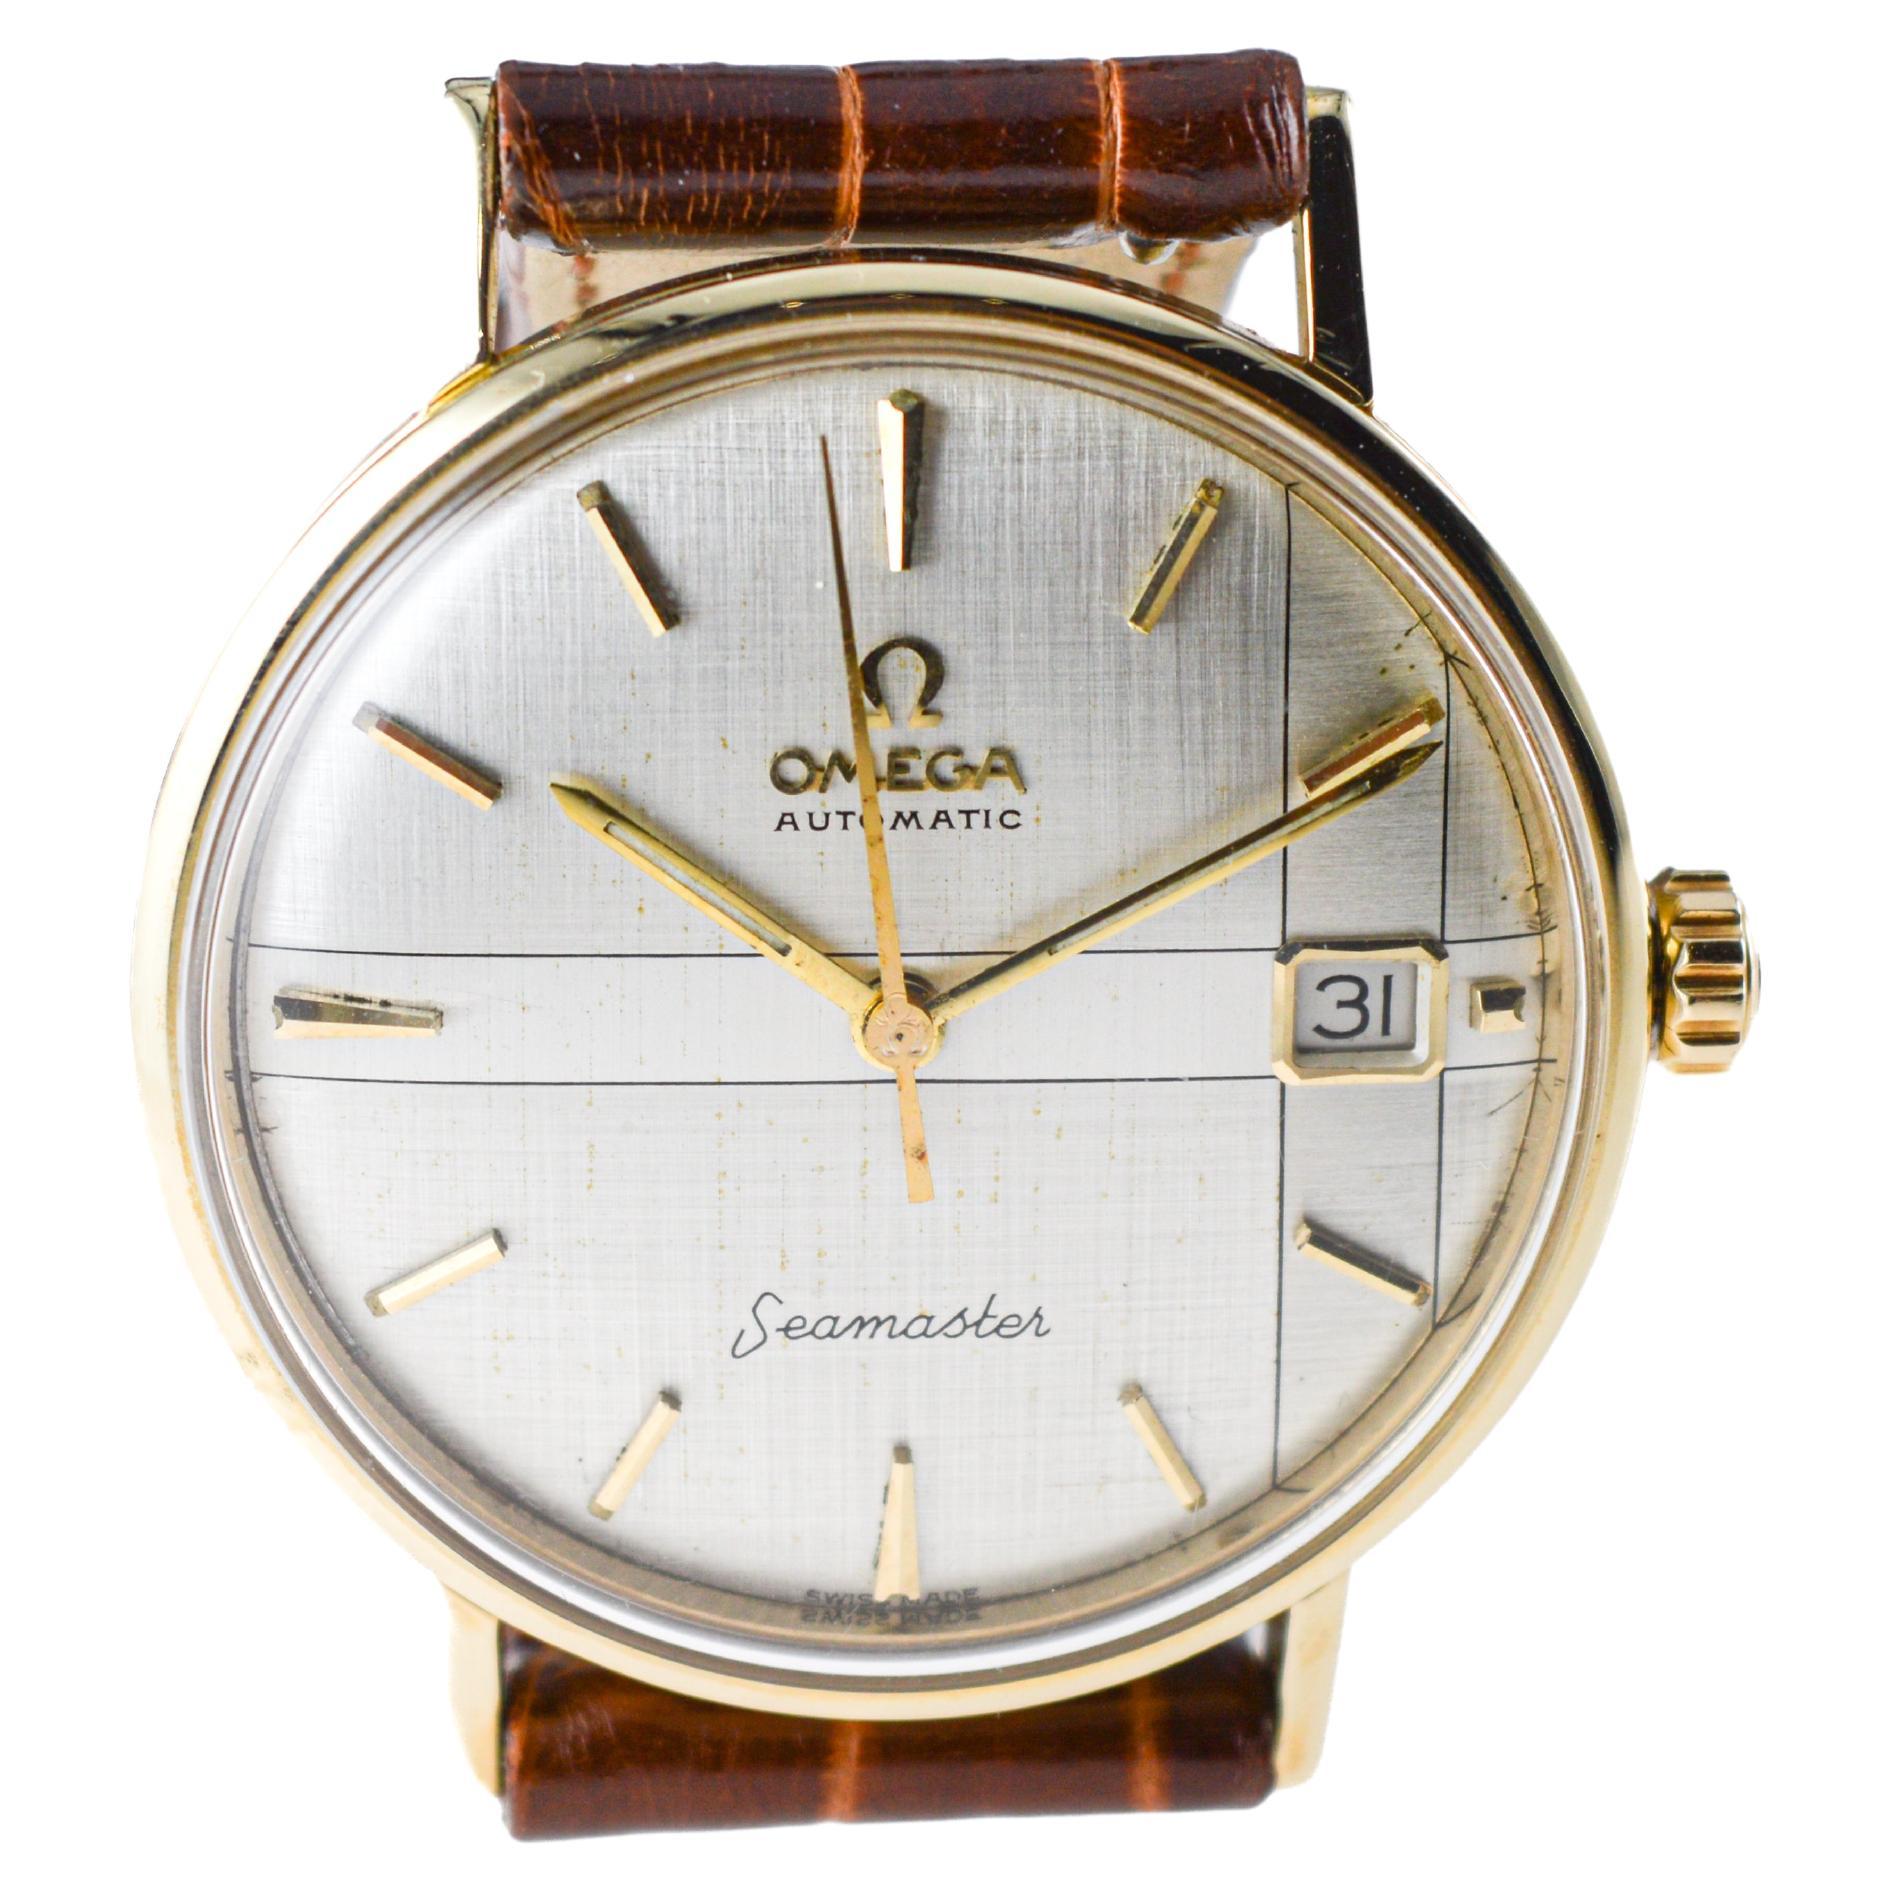 Omega 14 Karat Solid Yellow Gold with Unique Original Quadrant Dial Watch For Sale 1